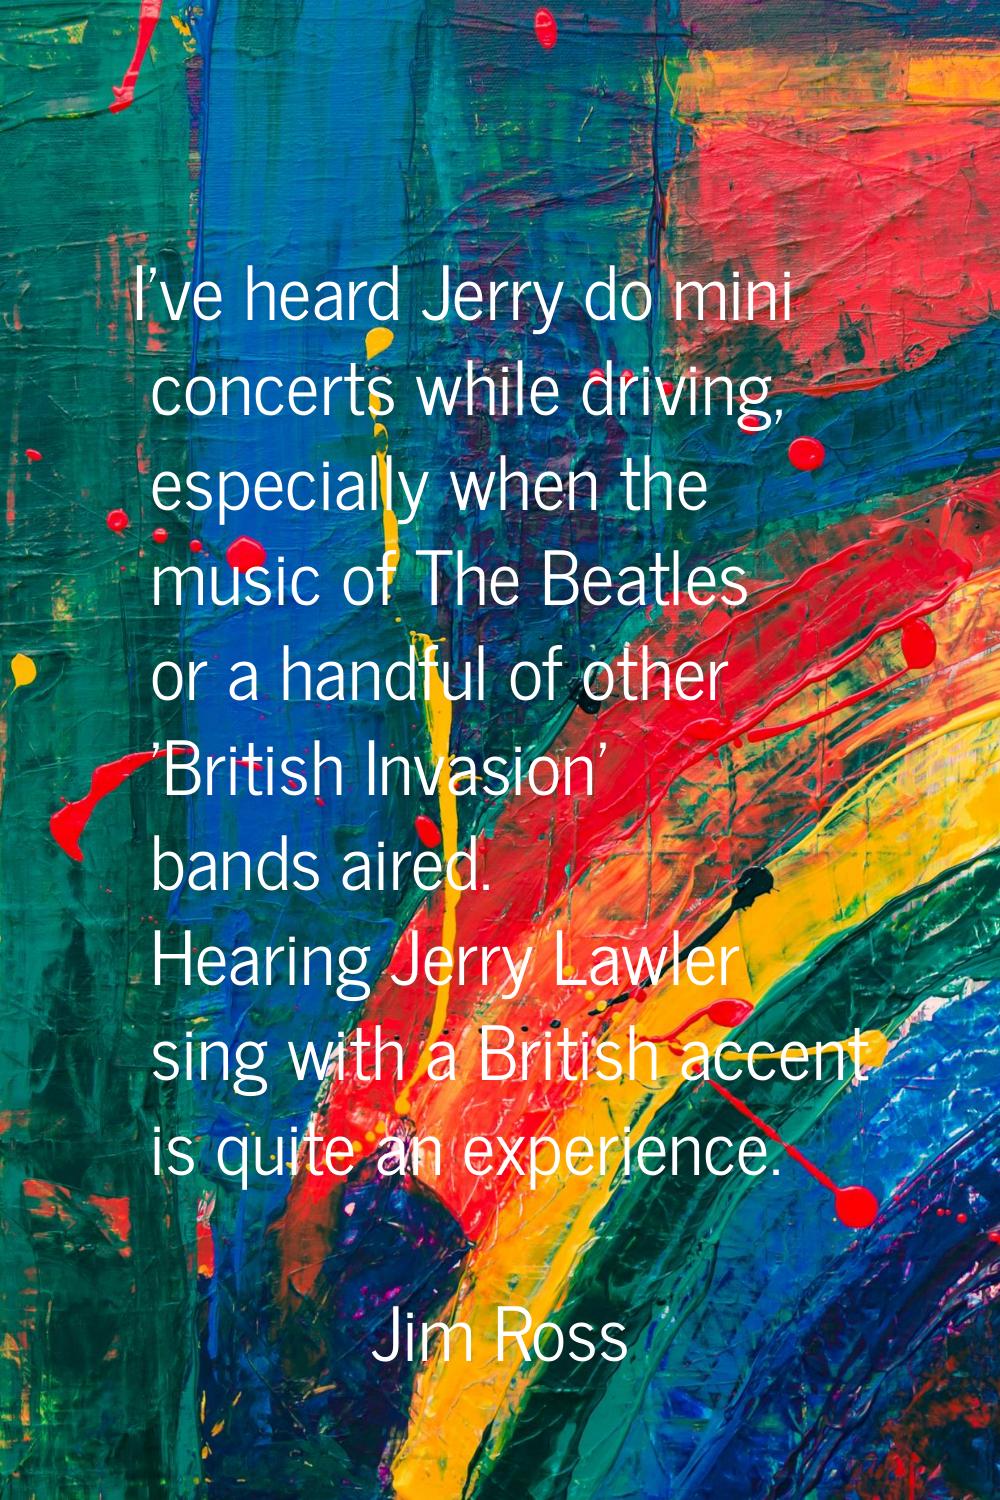 I've heard Jerry do mini concerts while driving, especially when the music of The Beatles or a hand